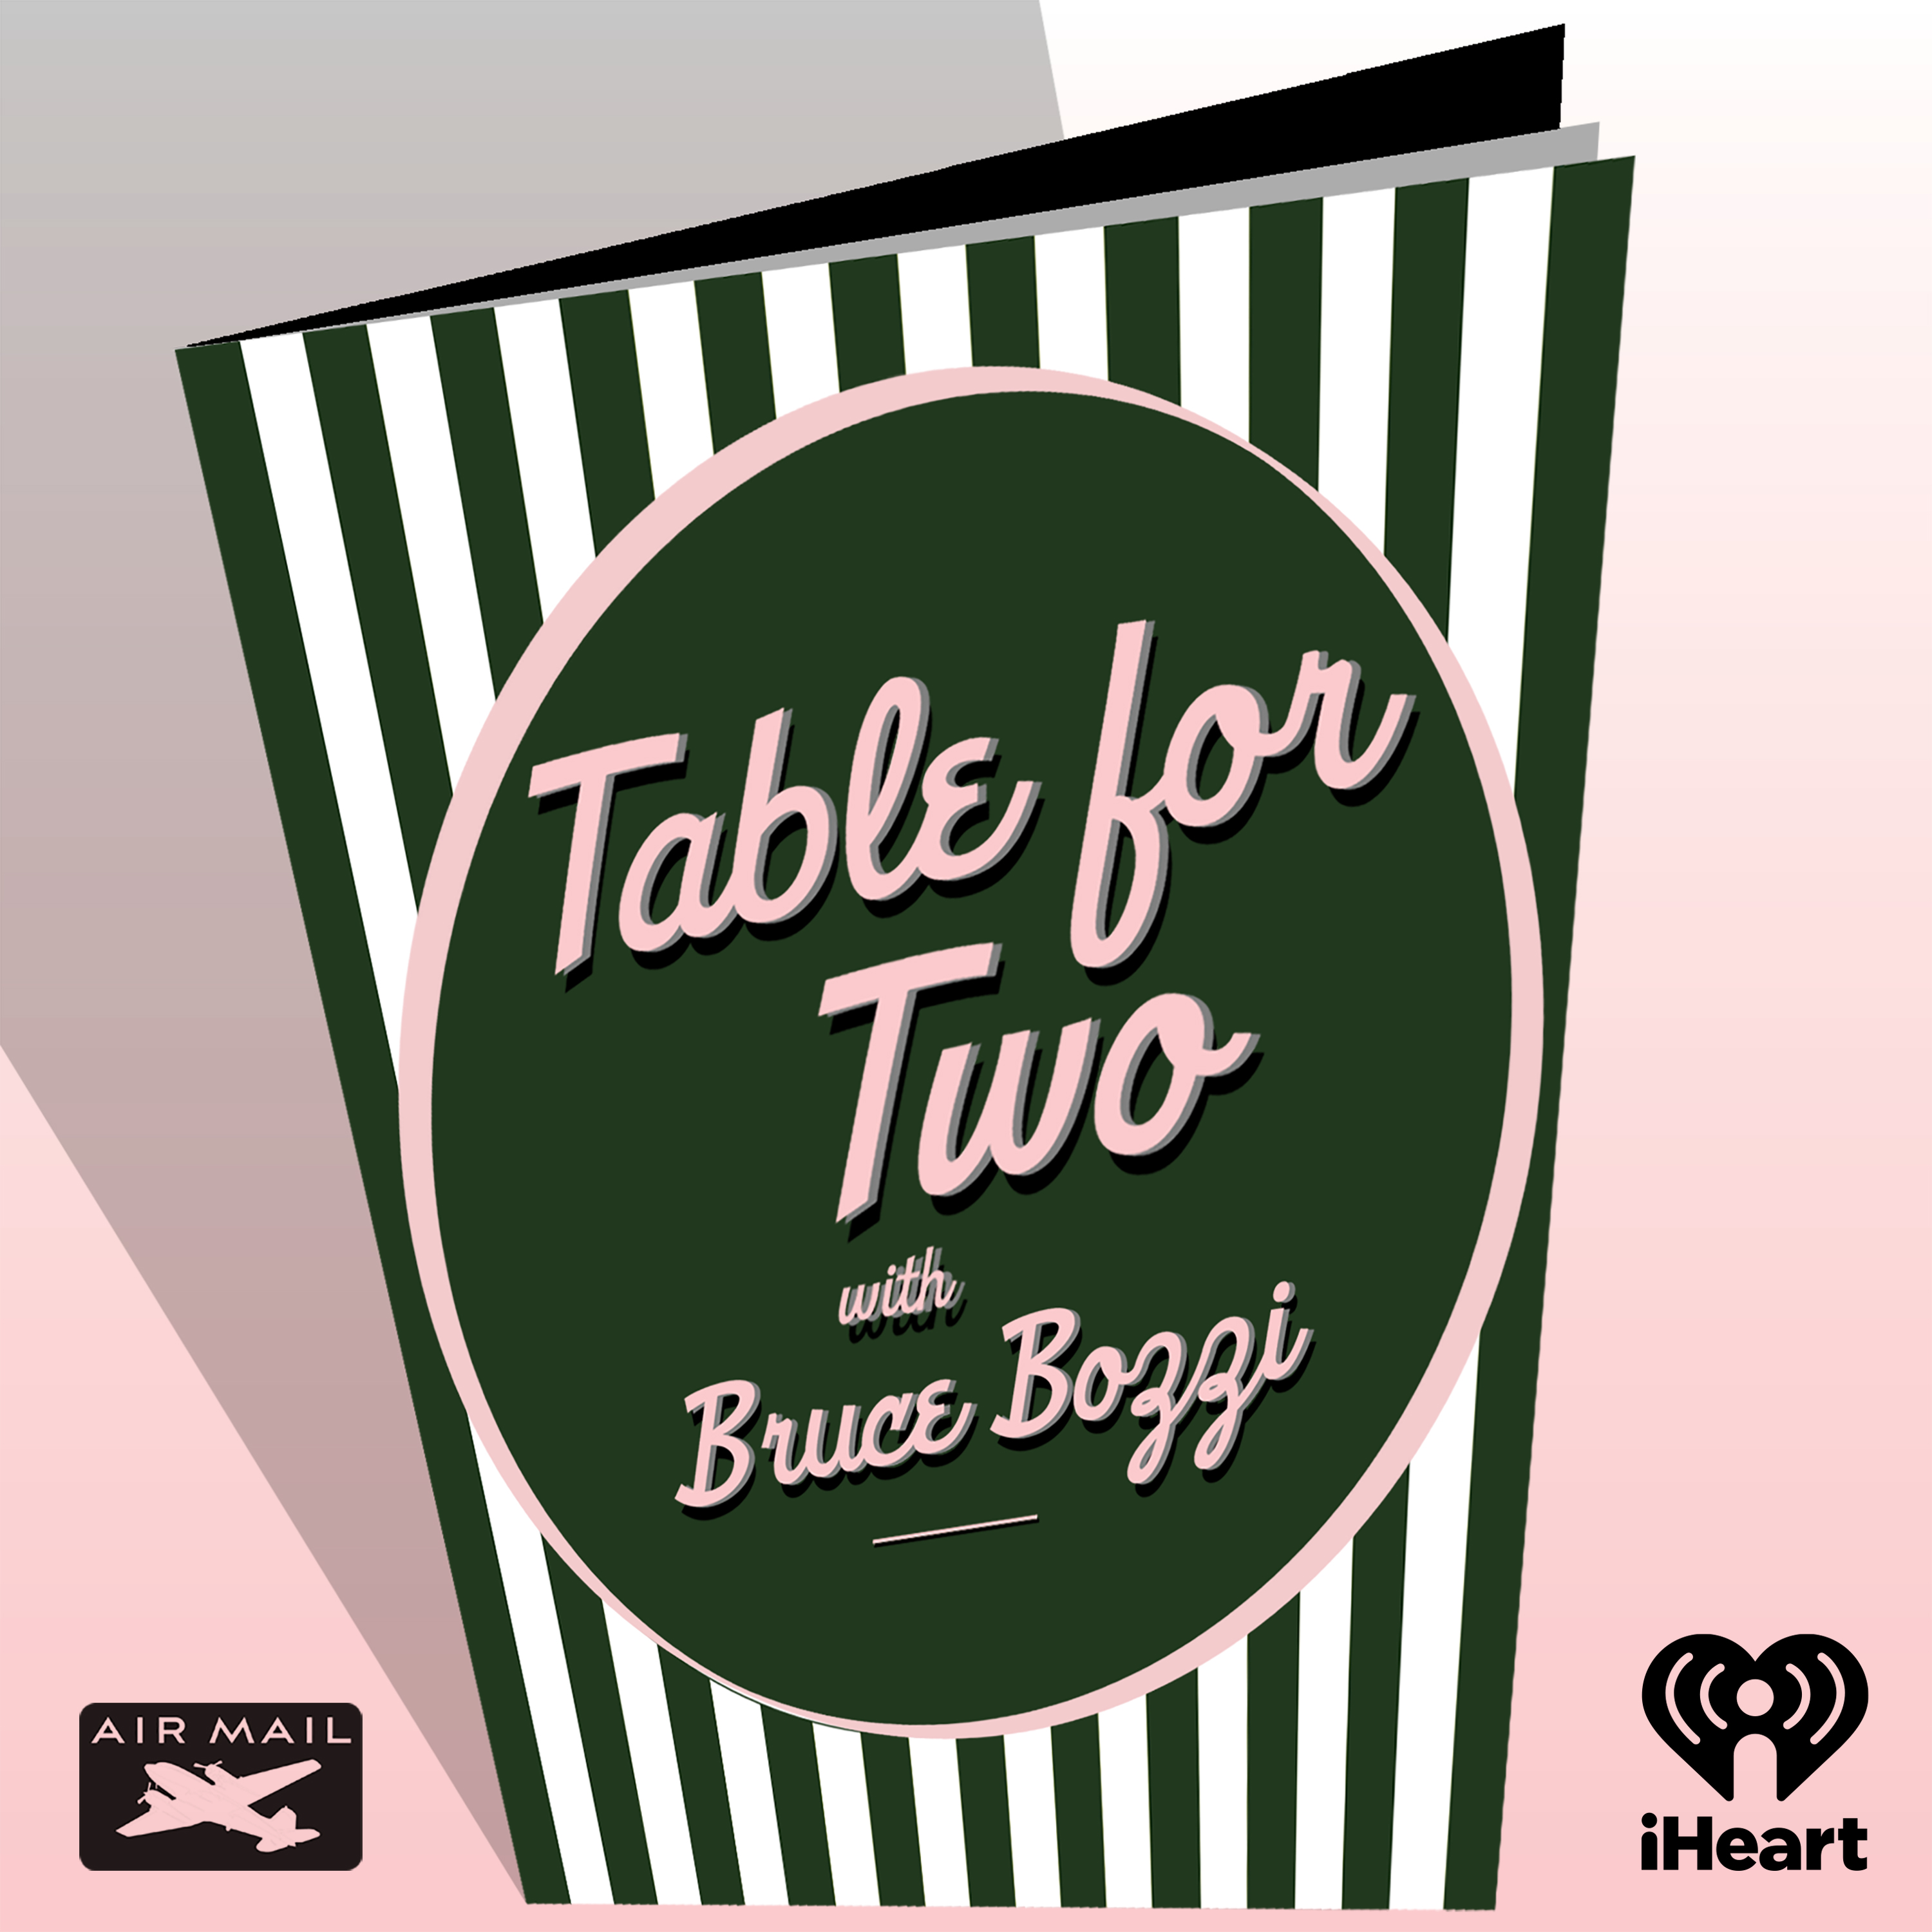 Table for Two: Season Two Trailer